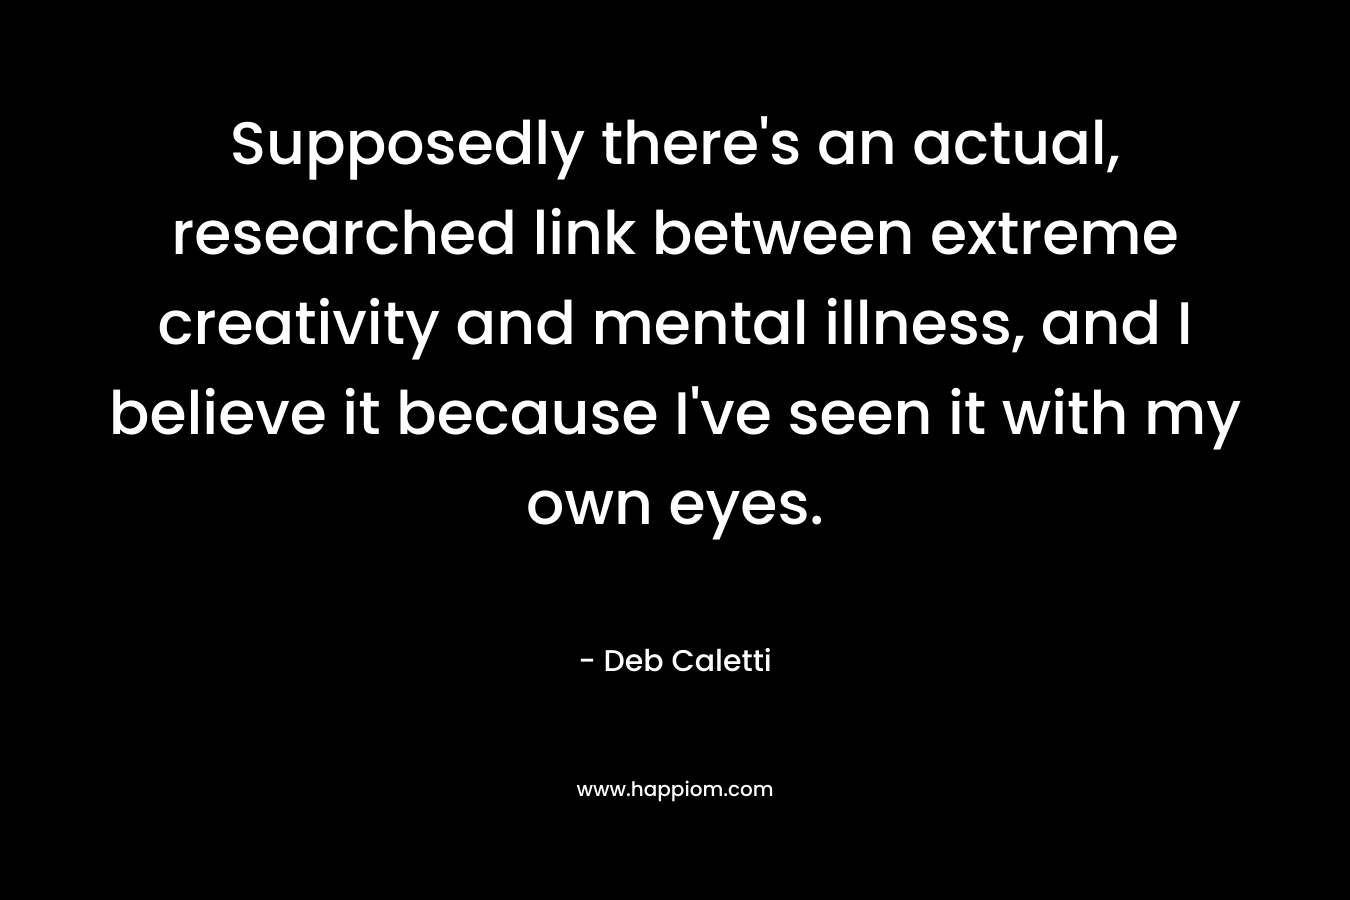 Supposedly there's an actual, researched link between extreme creativity and mental illness, and I believe it because I've seen it with my own eyes.